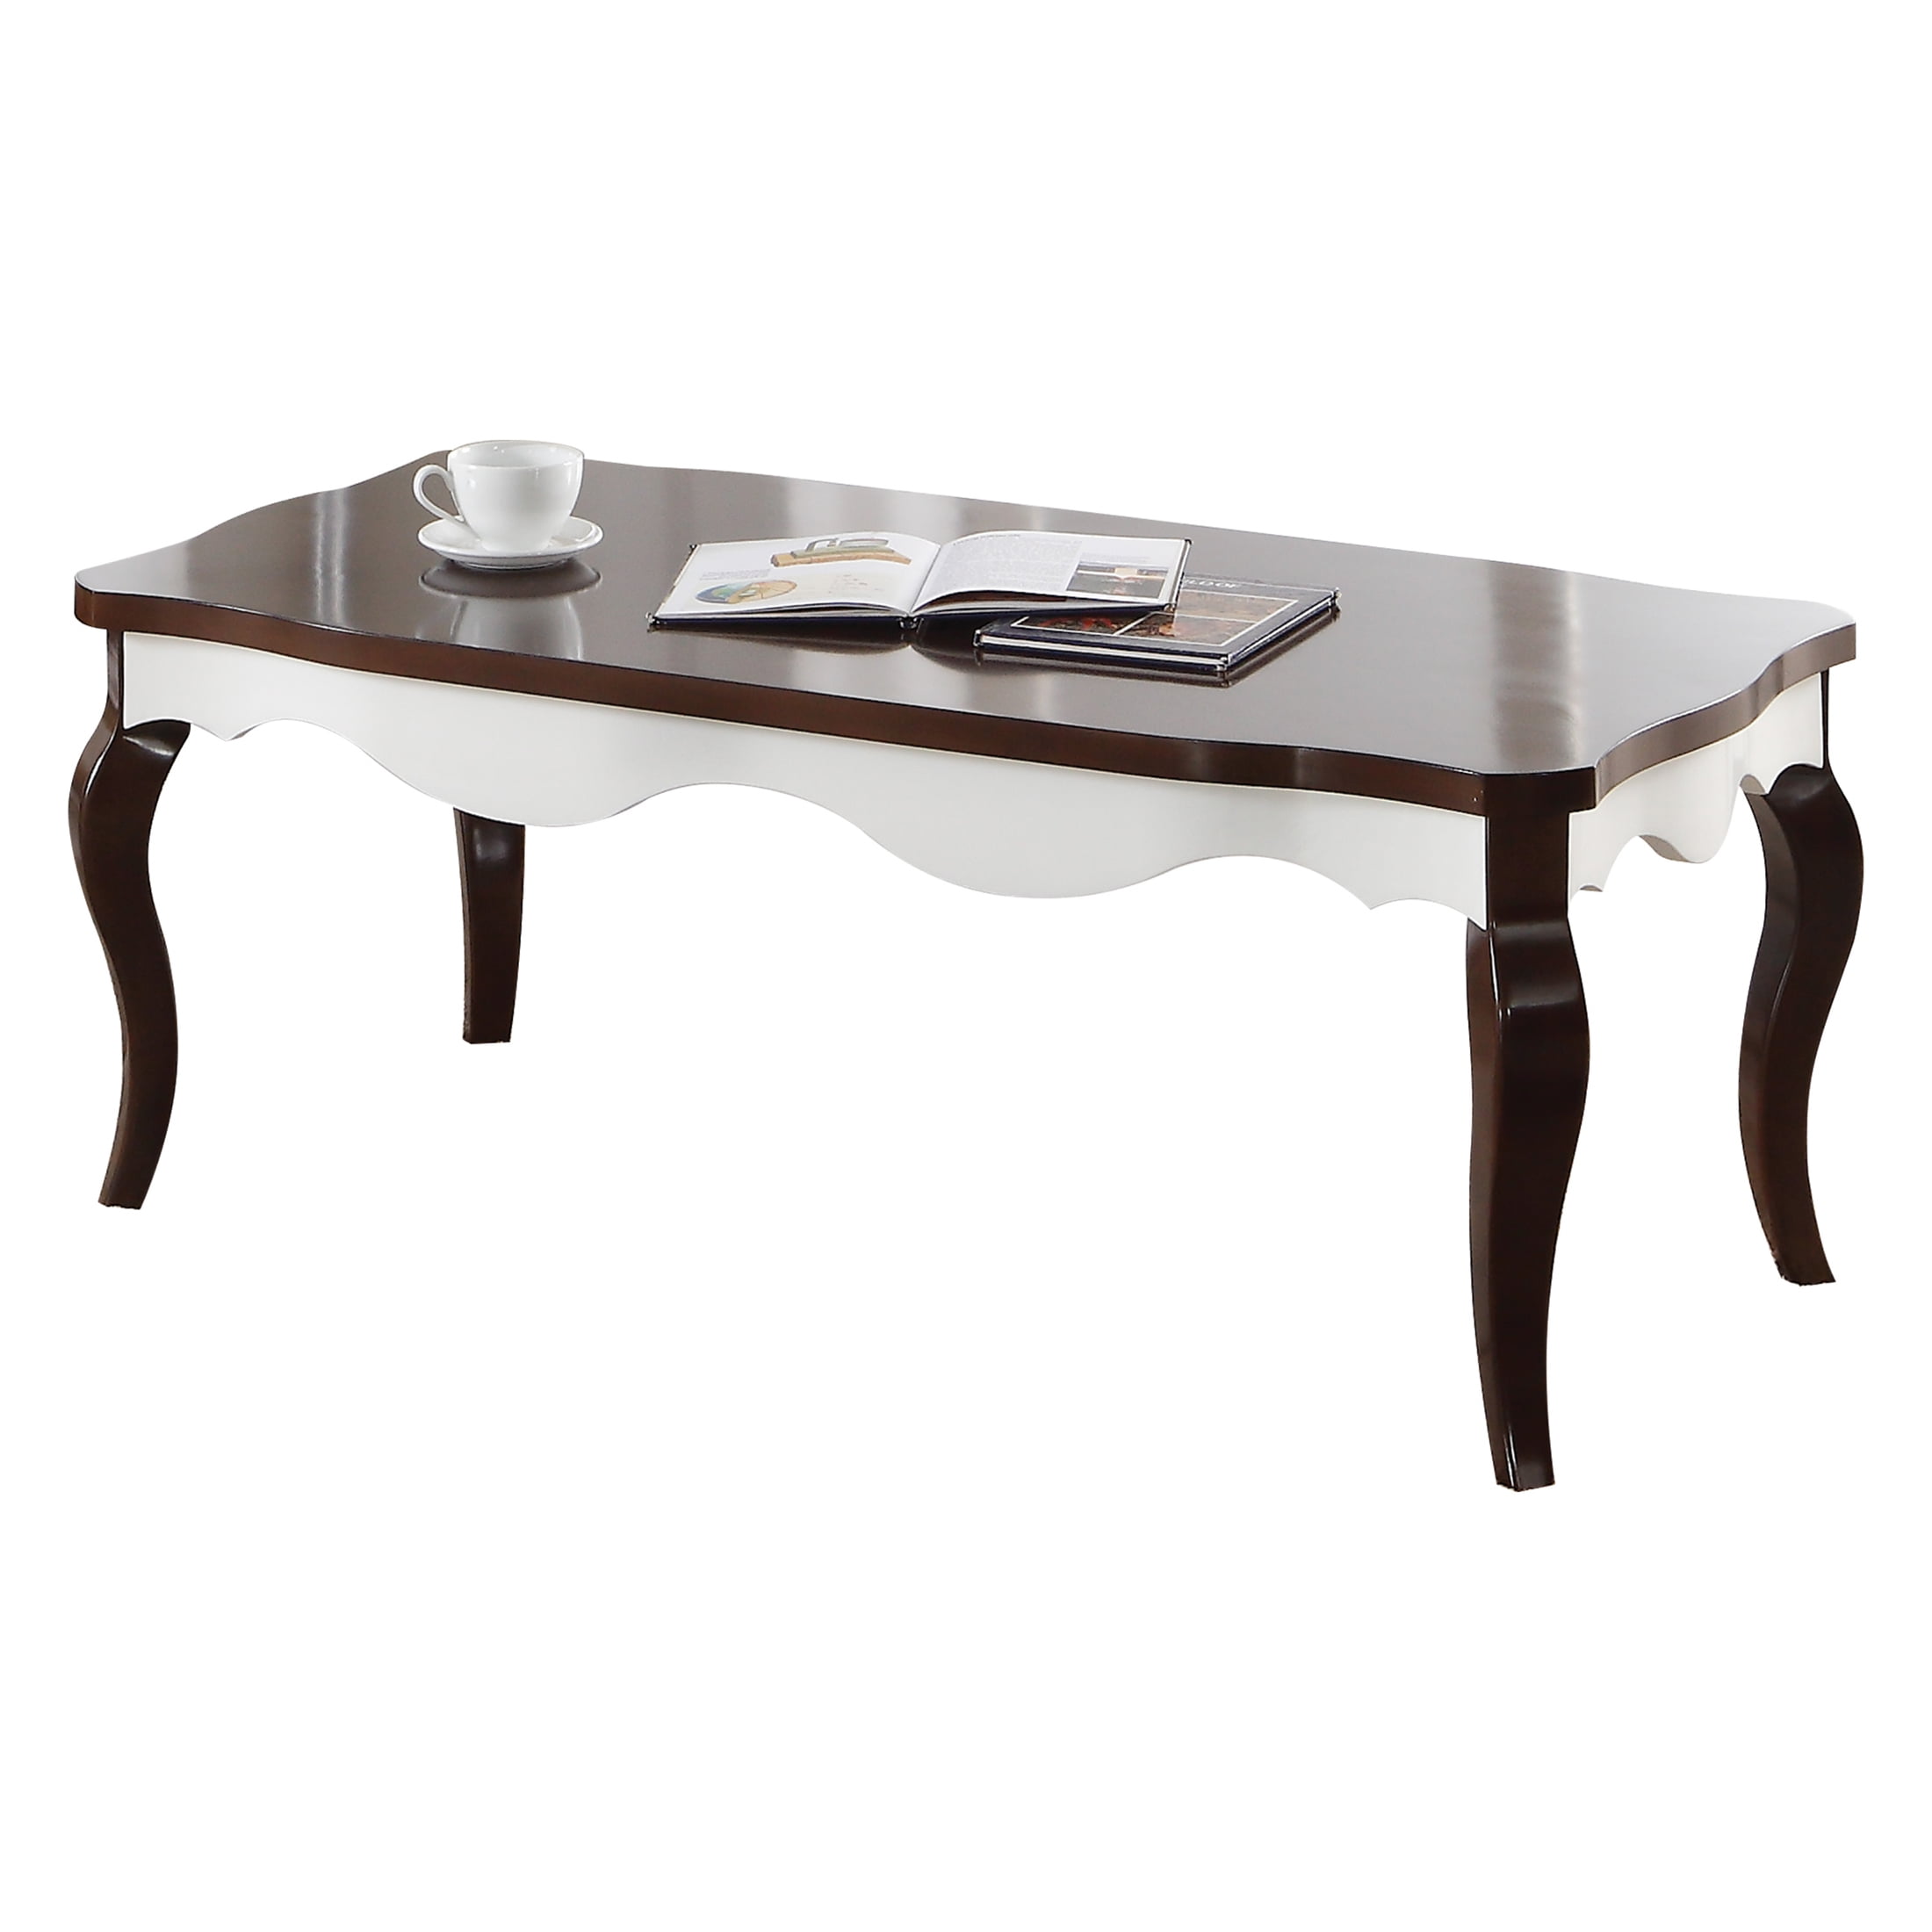 Picture of ACME 80680 Mathias Coffee Table - Walnut & White - 18 x 48 x 24 in.